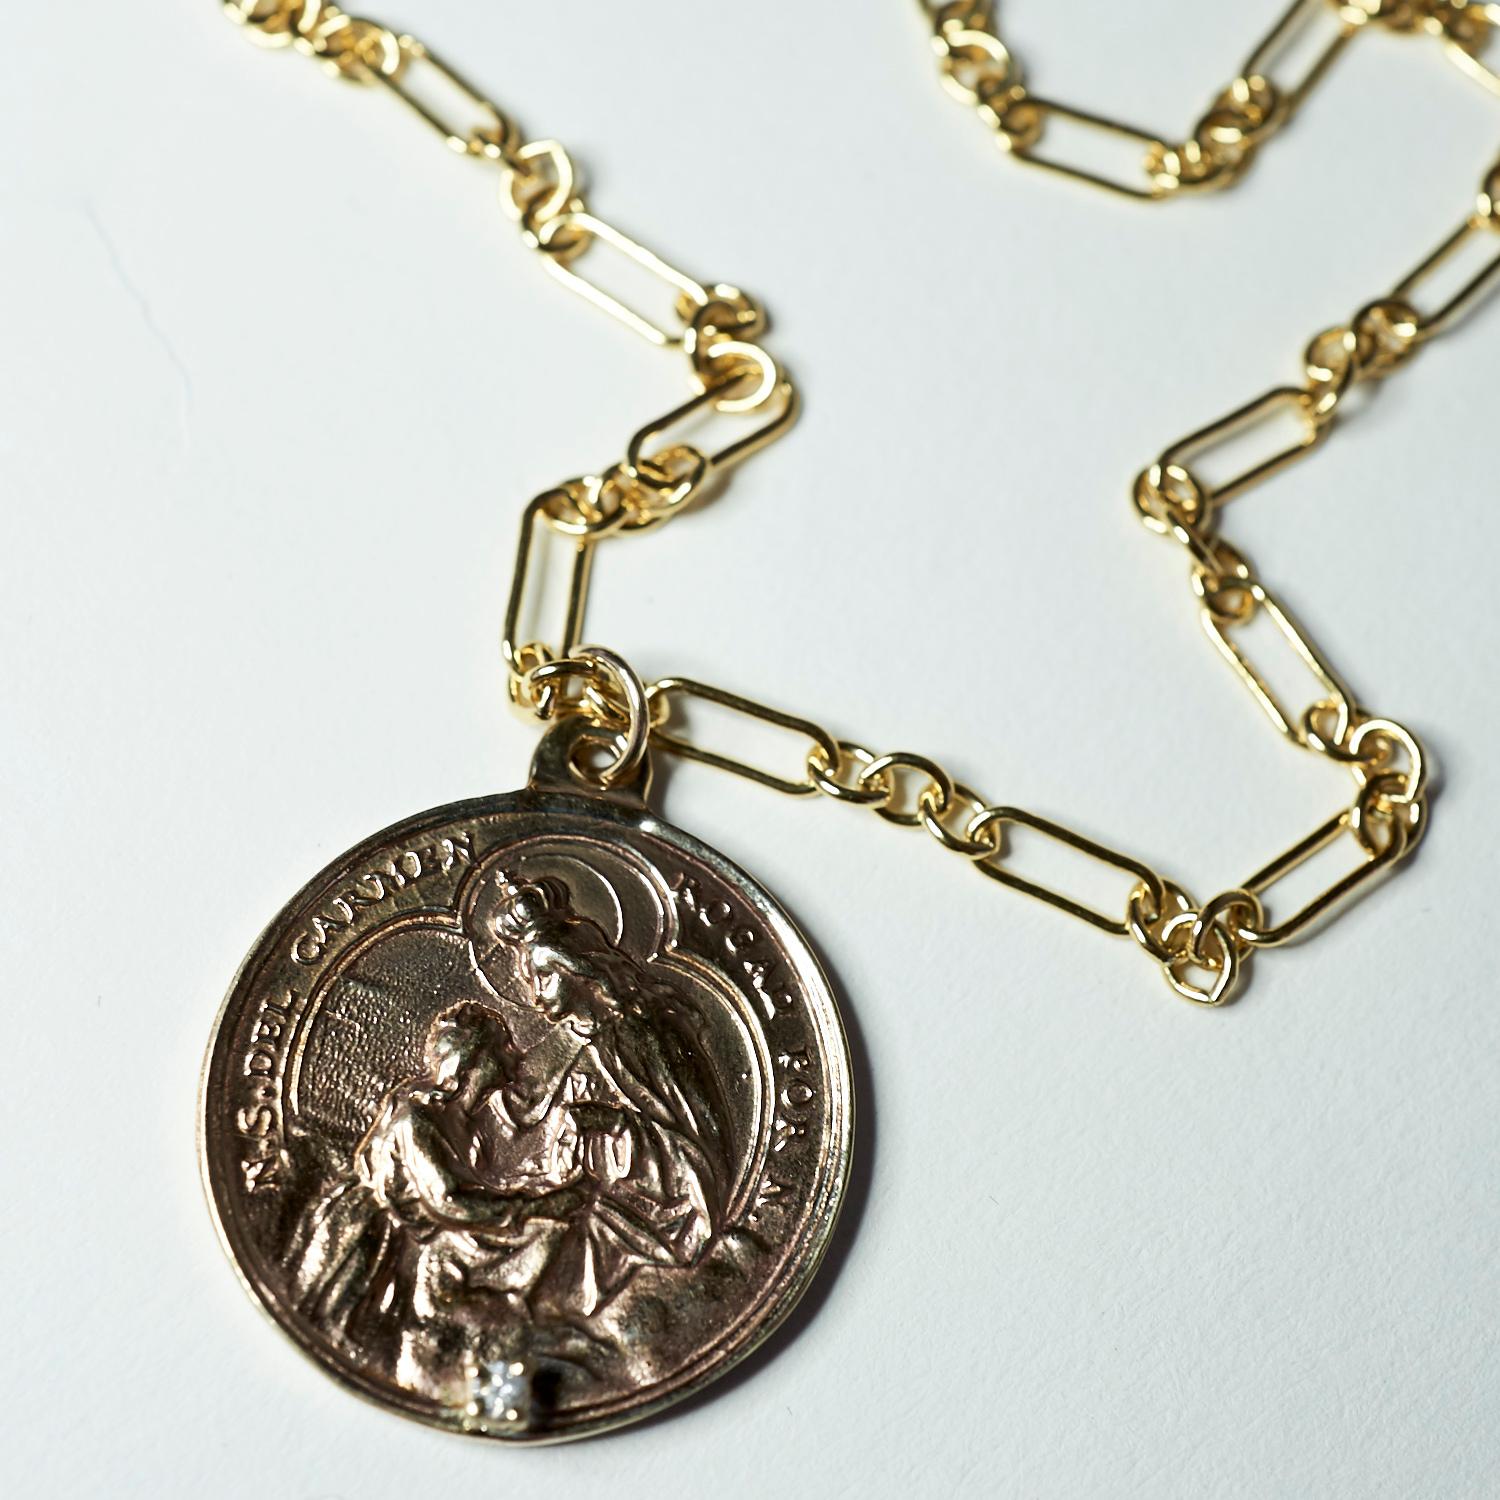 Diamond Virgin Mary Medal Coin Pendant Chain Necklace J Dauphin In New Condition For Sale In Los Angeles, CA